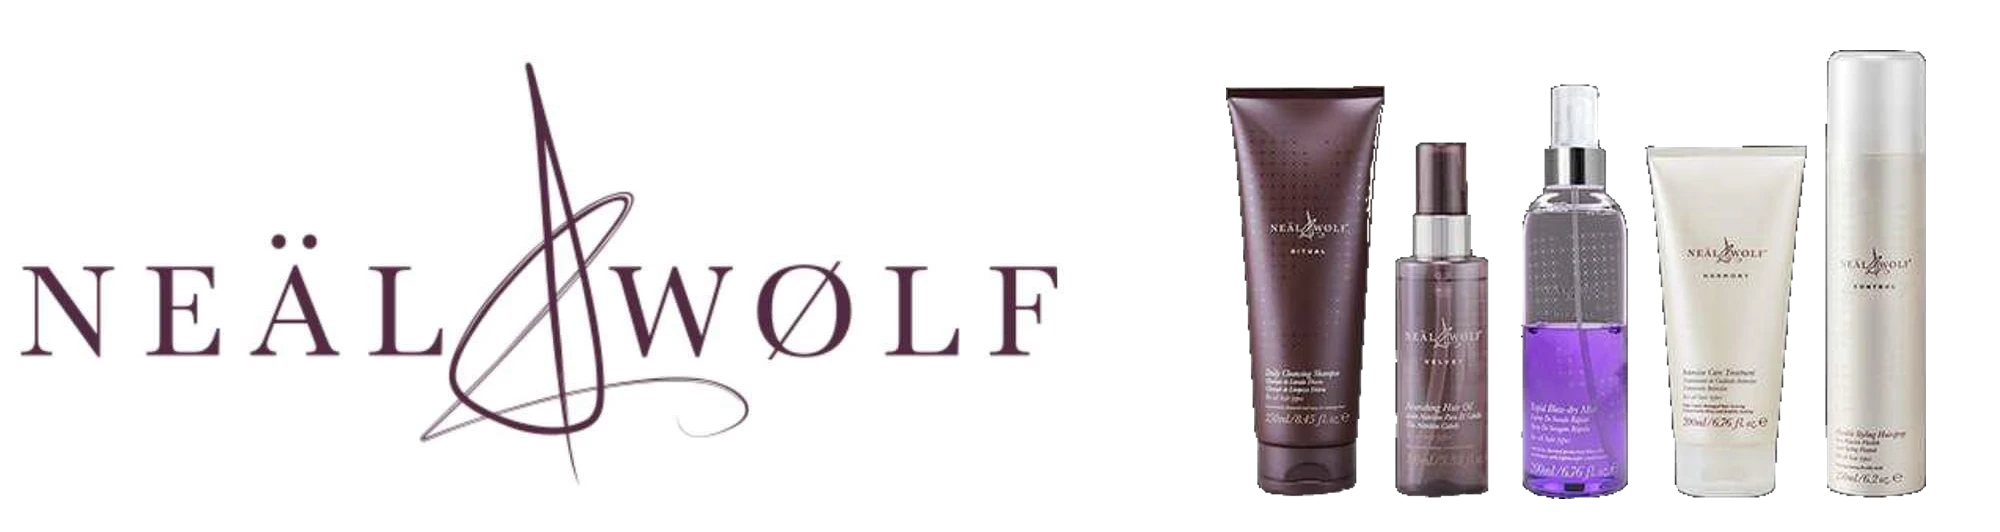 Neale Wolf products